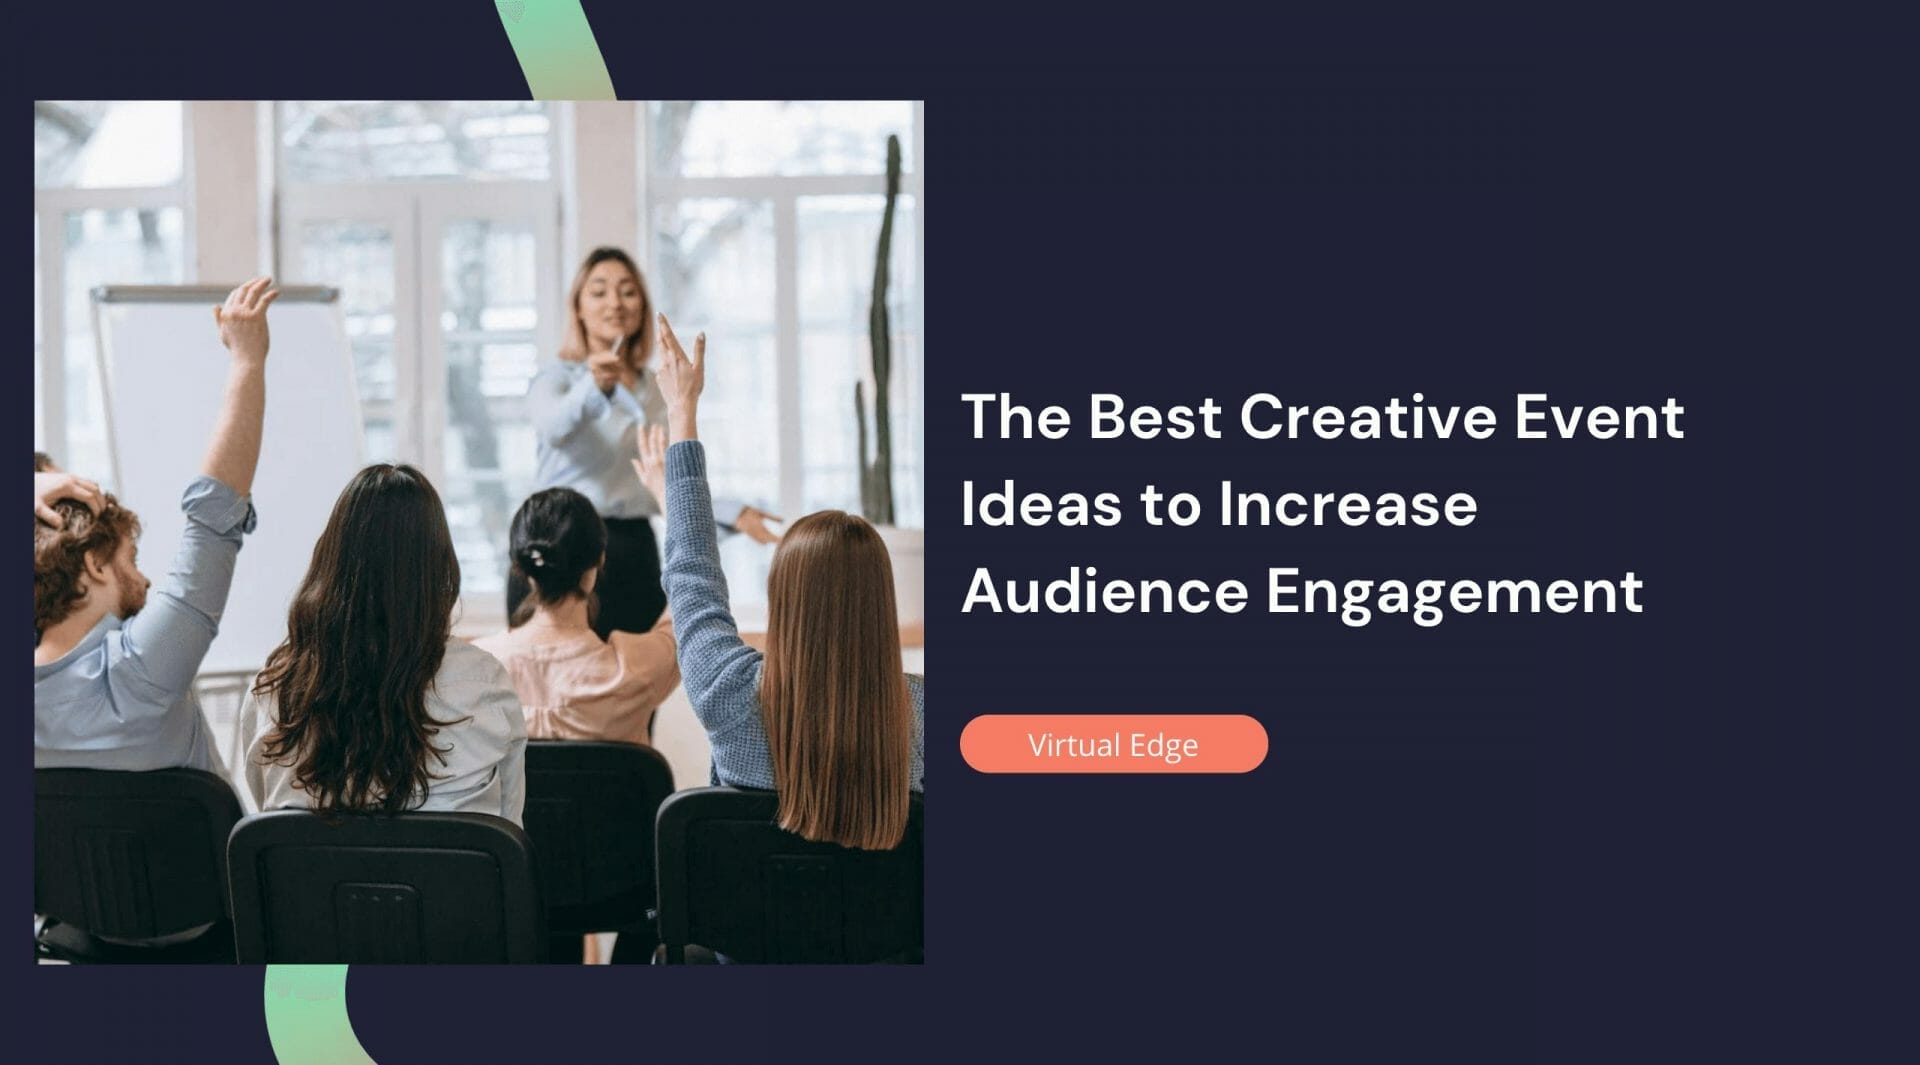 The Best Creative Event Ideas to Increase Audience Engagement